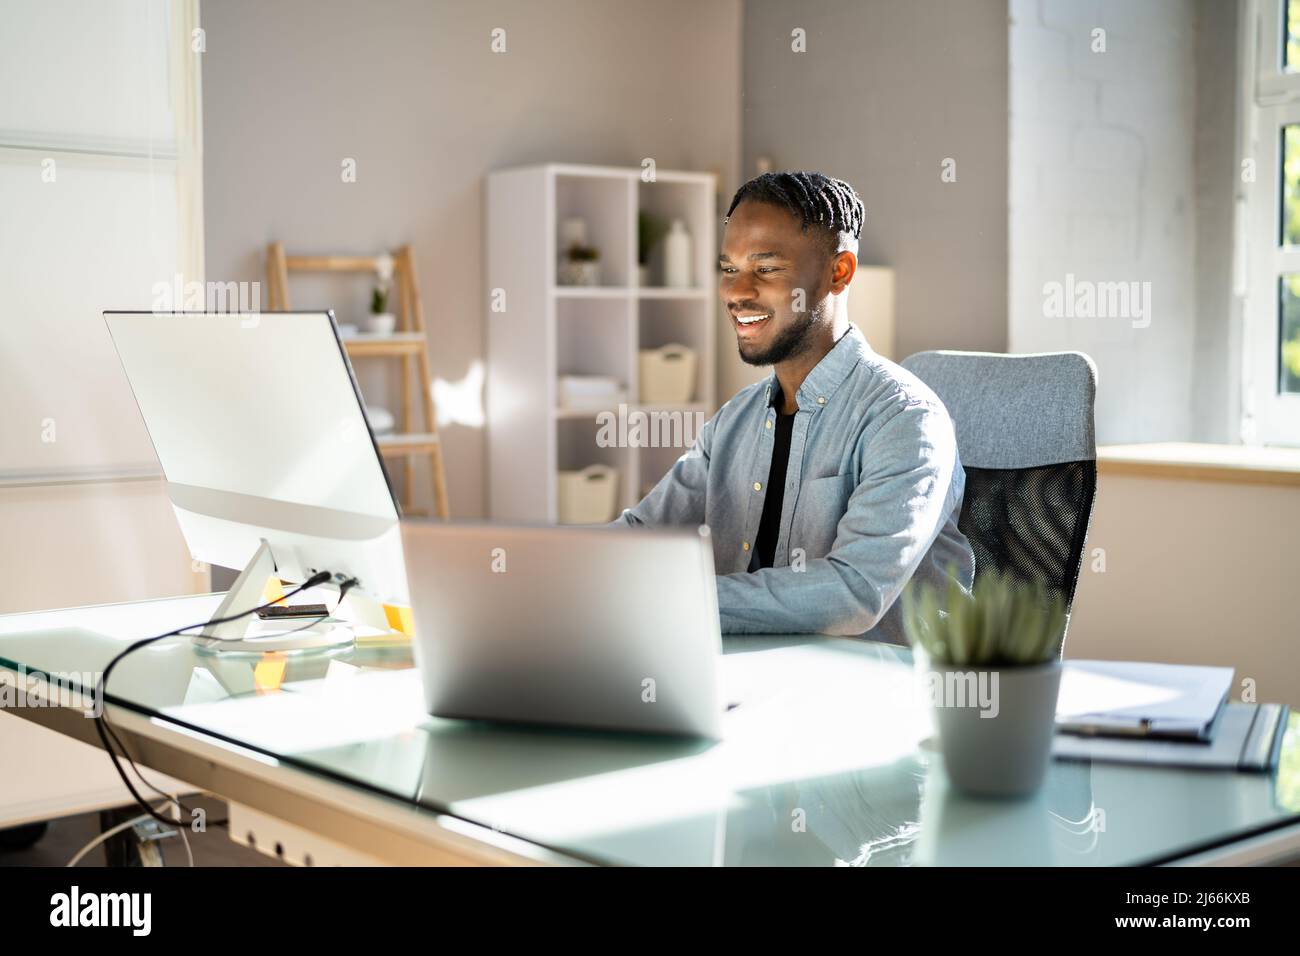 Man At Workplace. Manager Doing Business Communication In Office Stock Photo